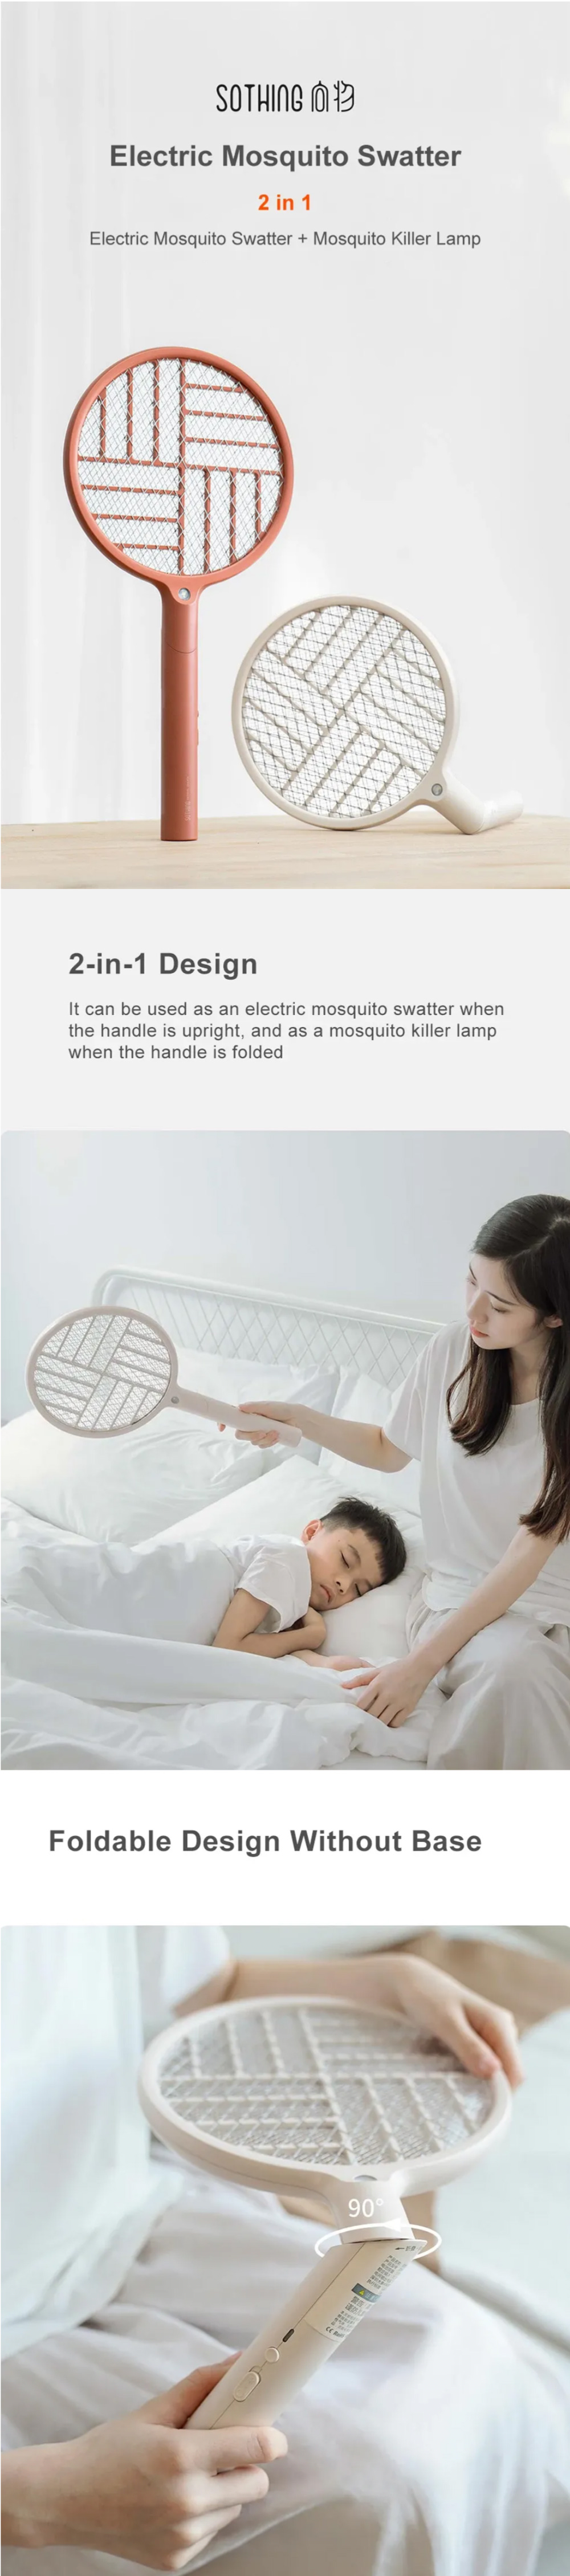 Xiaomi Sothing WINDOW Electric Mosquito Swatter